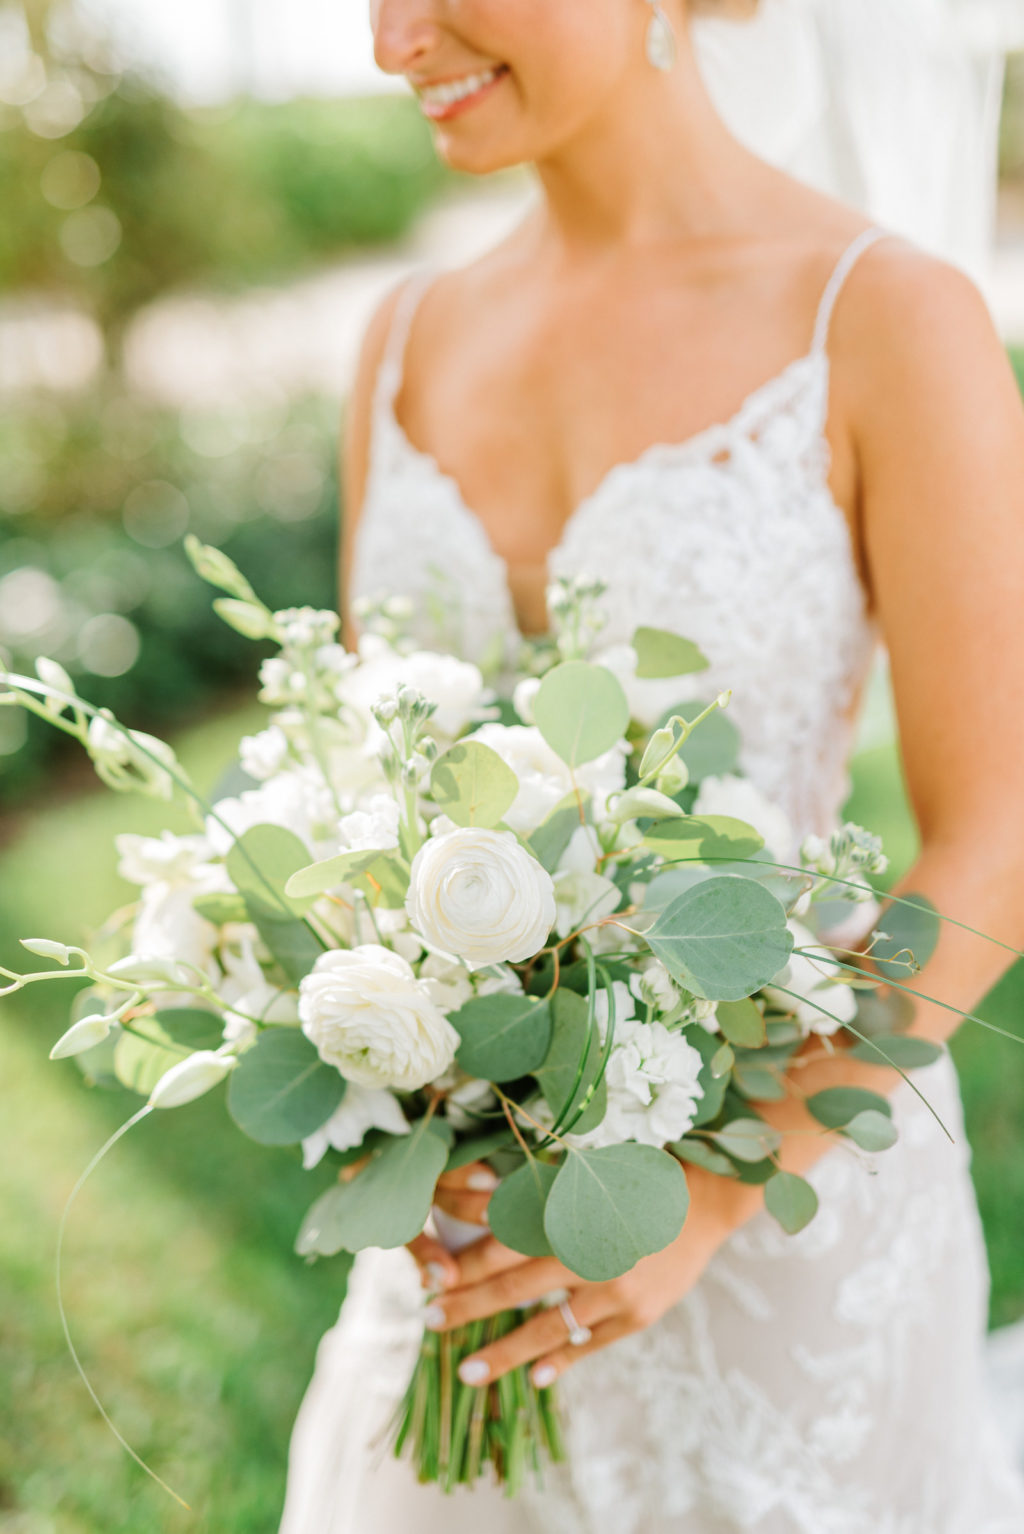 Bride in Romantic Lace Spaghetti Strap Wedding Dress Holding Greenery Eucalyptus and White Roses Floral Bouquet